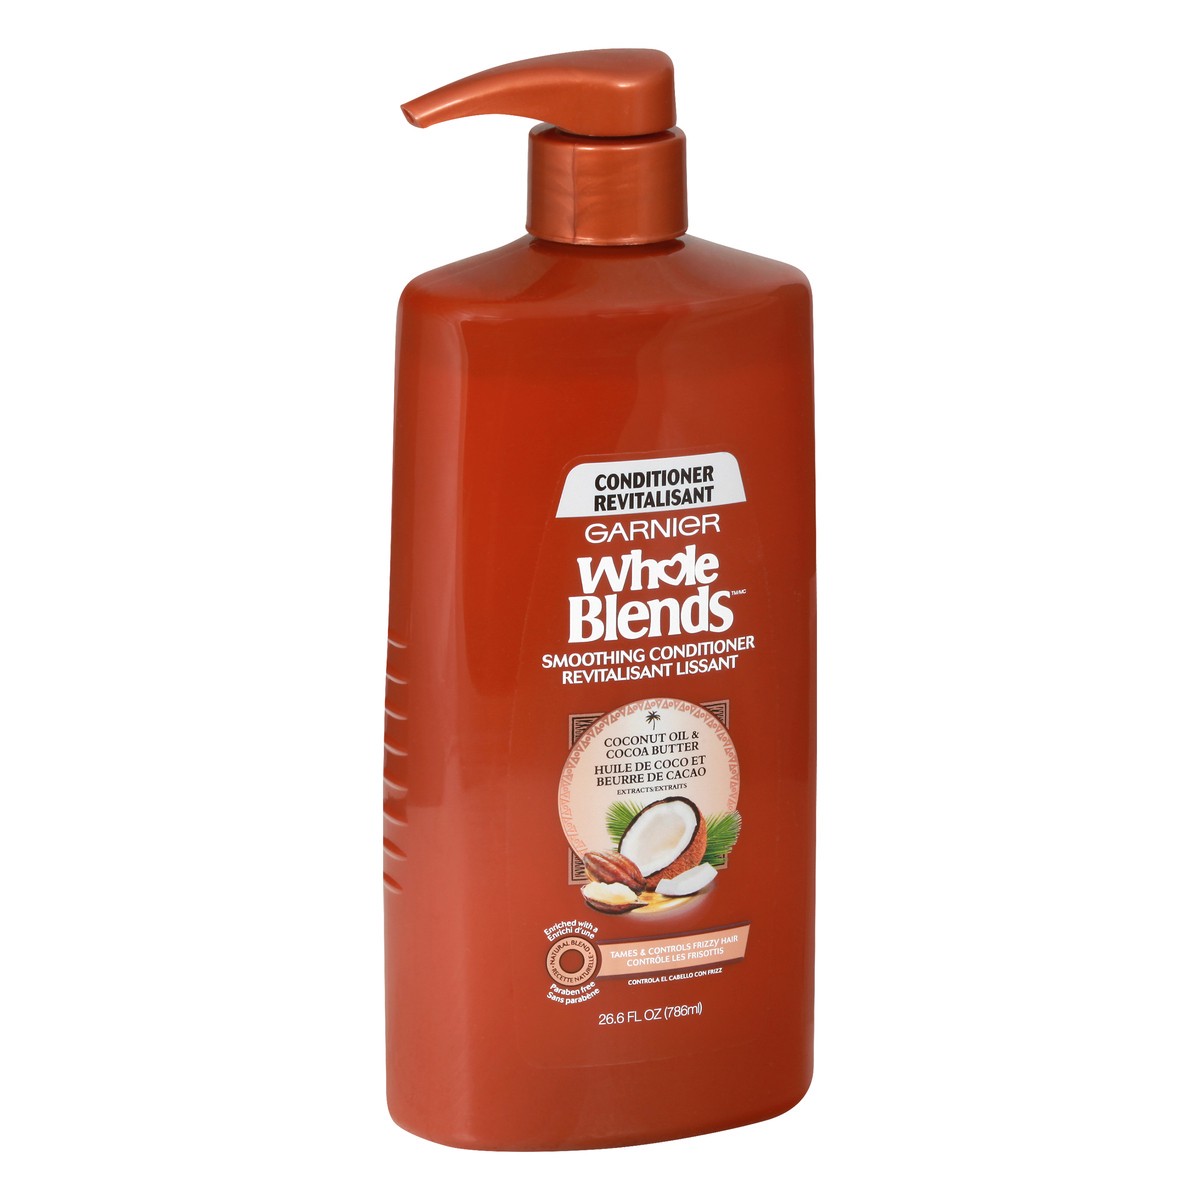 slide 2 of 9, Garnier Whole Blends Smoothing Pump Conditioner with Coconut Oil Extract - 26.6 fl oz, 26.6 fl oz